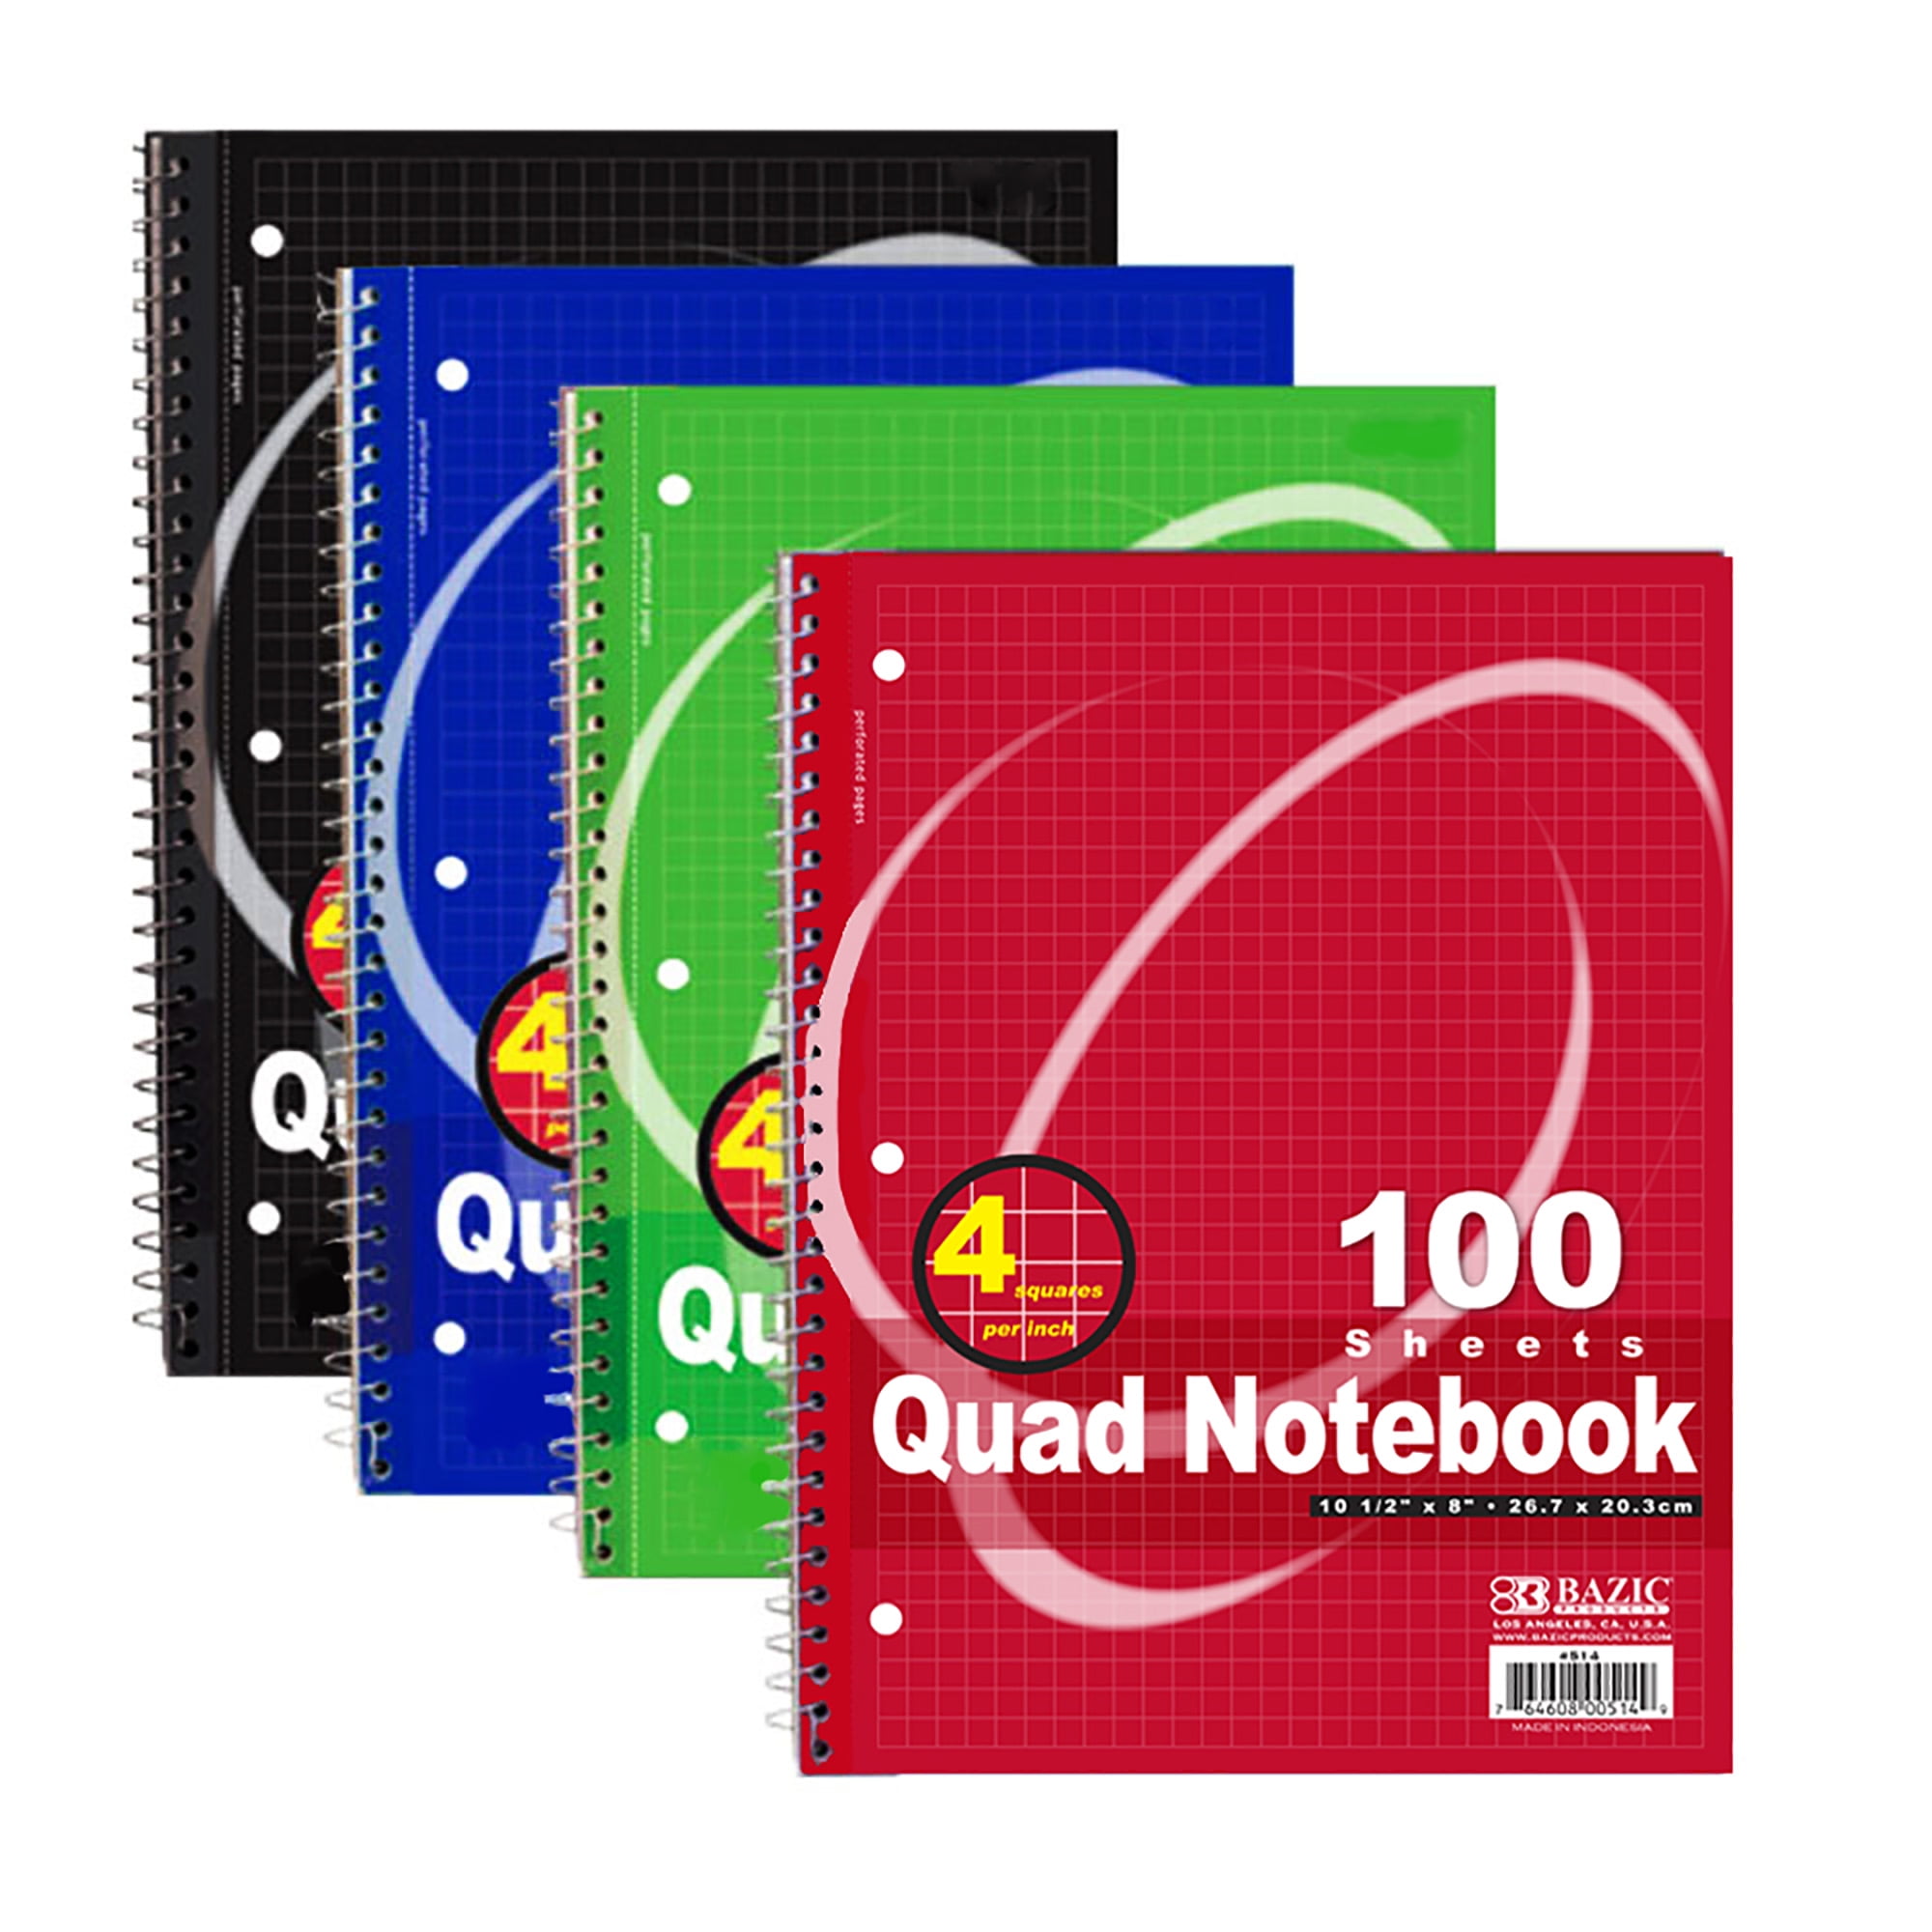 LOT OF 6 BAZIC Quad Ruled Quadrille Ruled Notebooks Graph Paper Composition Book 